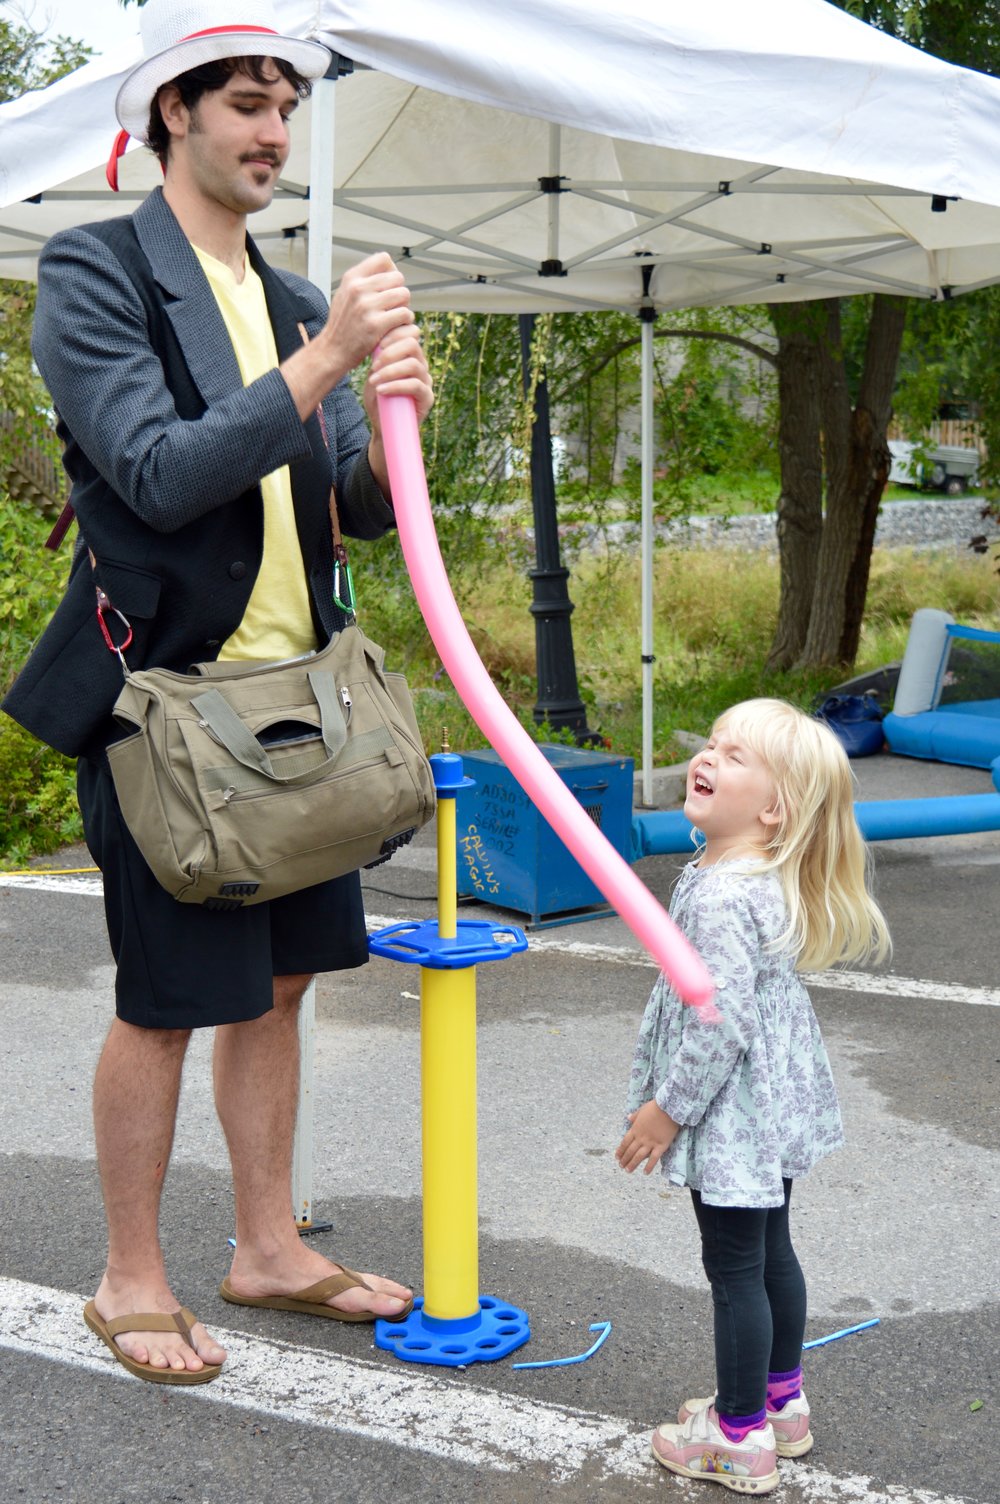 Madeline Cooney of Stirling seems to be enjoying the talents of Christopher The Twistopher at the 2016 Stirling Water Buffalo Festival. The Balloon Sculptor Extraordinaire entertained for hours in the festival’s Kidz Zone.